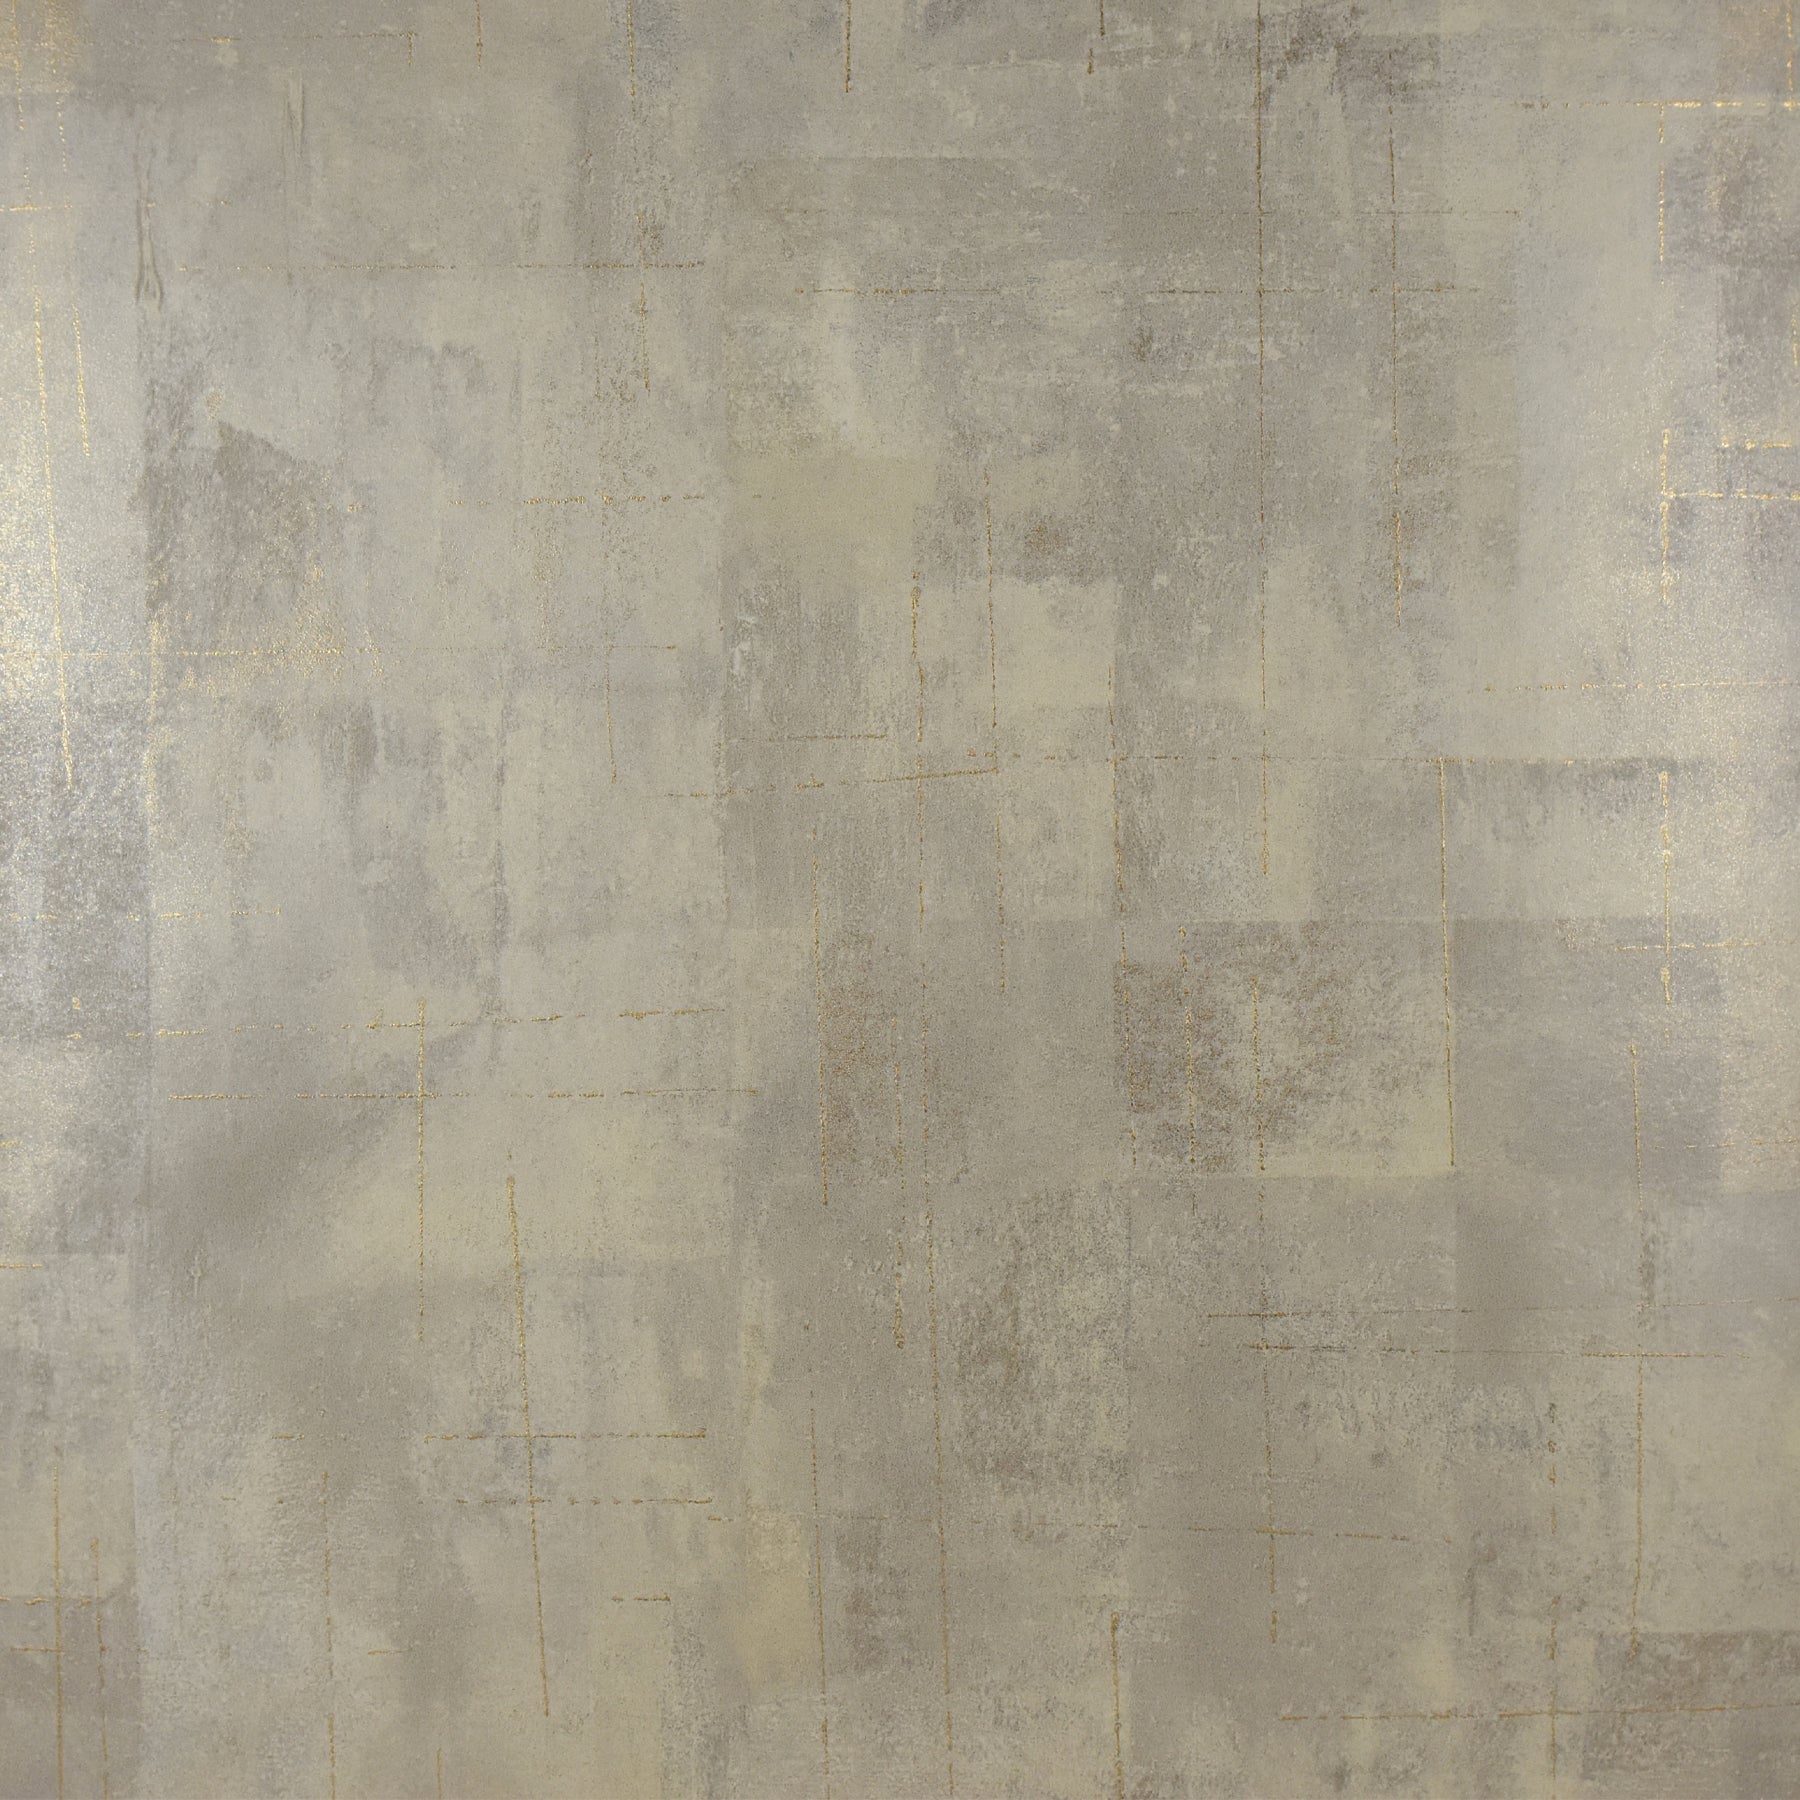 Buy 2927-20404 Polished Ozone Taupe Texture Taupe Brewster Wallpaper